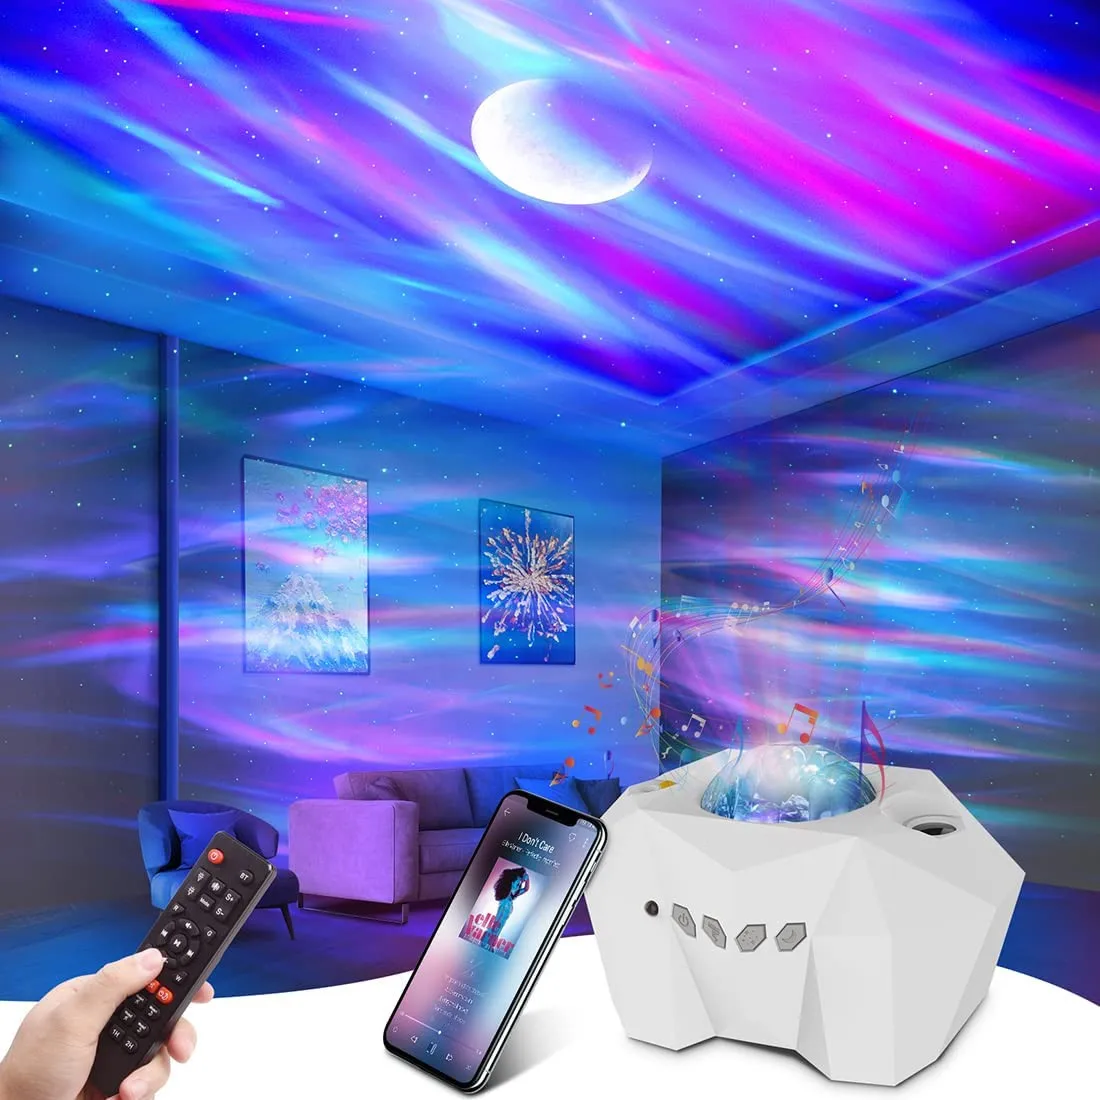 

LED Aurora Projector Galaxy Starry Sky Projector Lamp Northern Lights Bedroom Home Room Decoration Nightlights Luminaires Gift